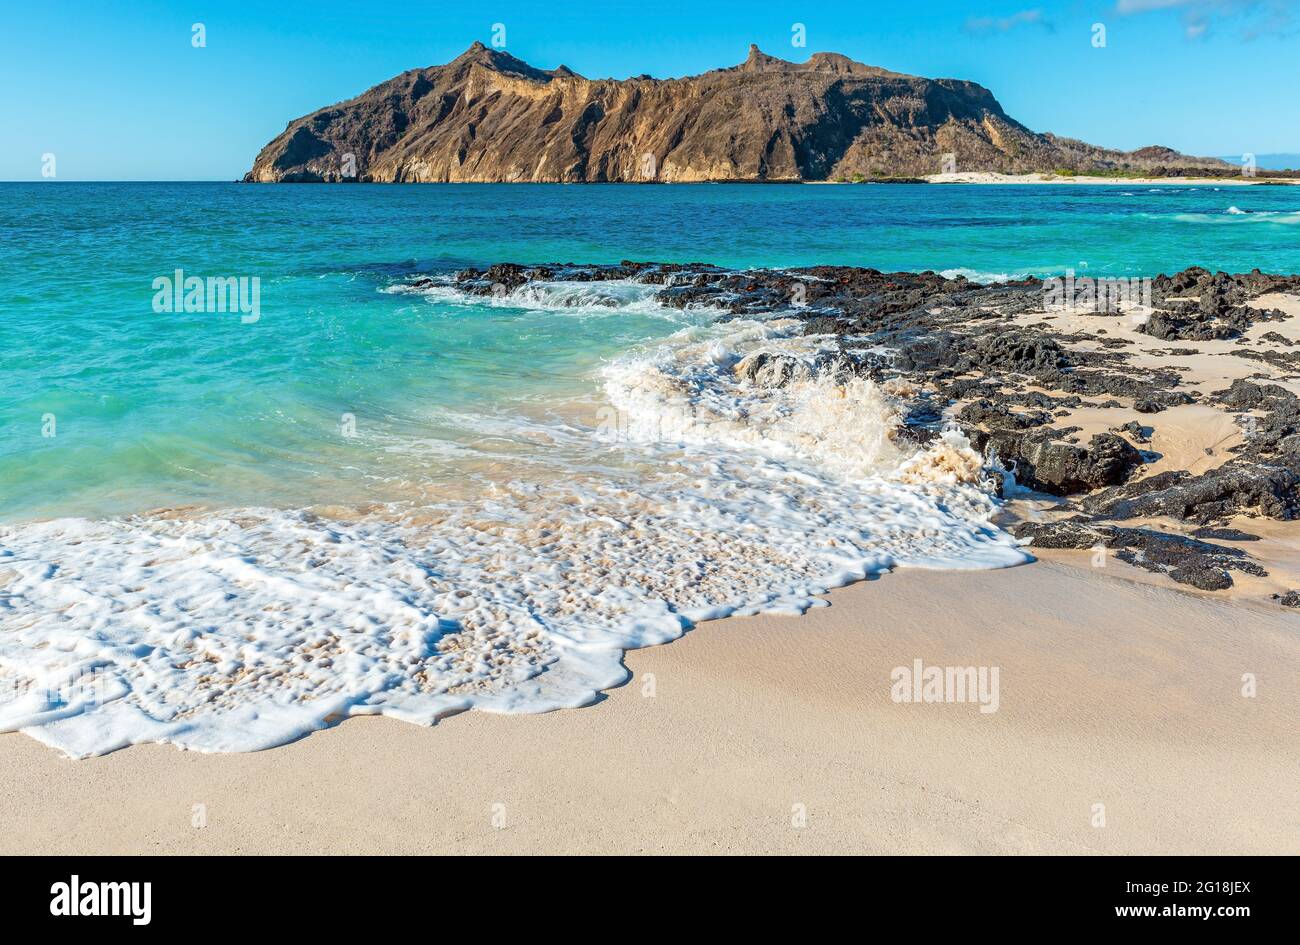 Galapagos beach landscape with strong waves, Stephens Bay with Witch Hill in background, San Cristobal island, Galapagos, Ecuador. Stock Photo